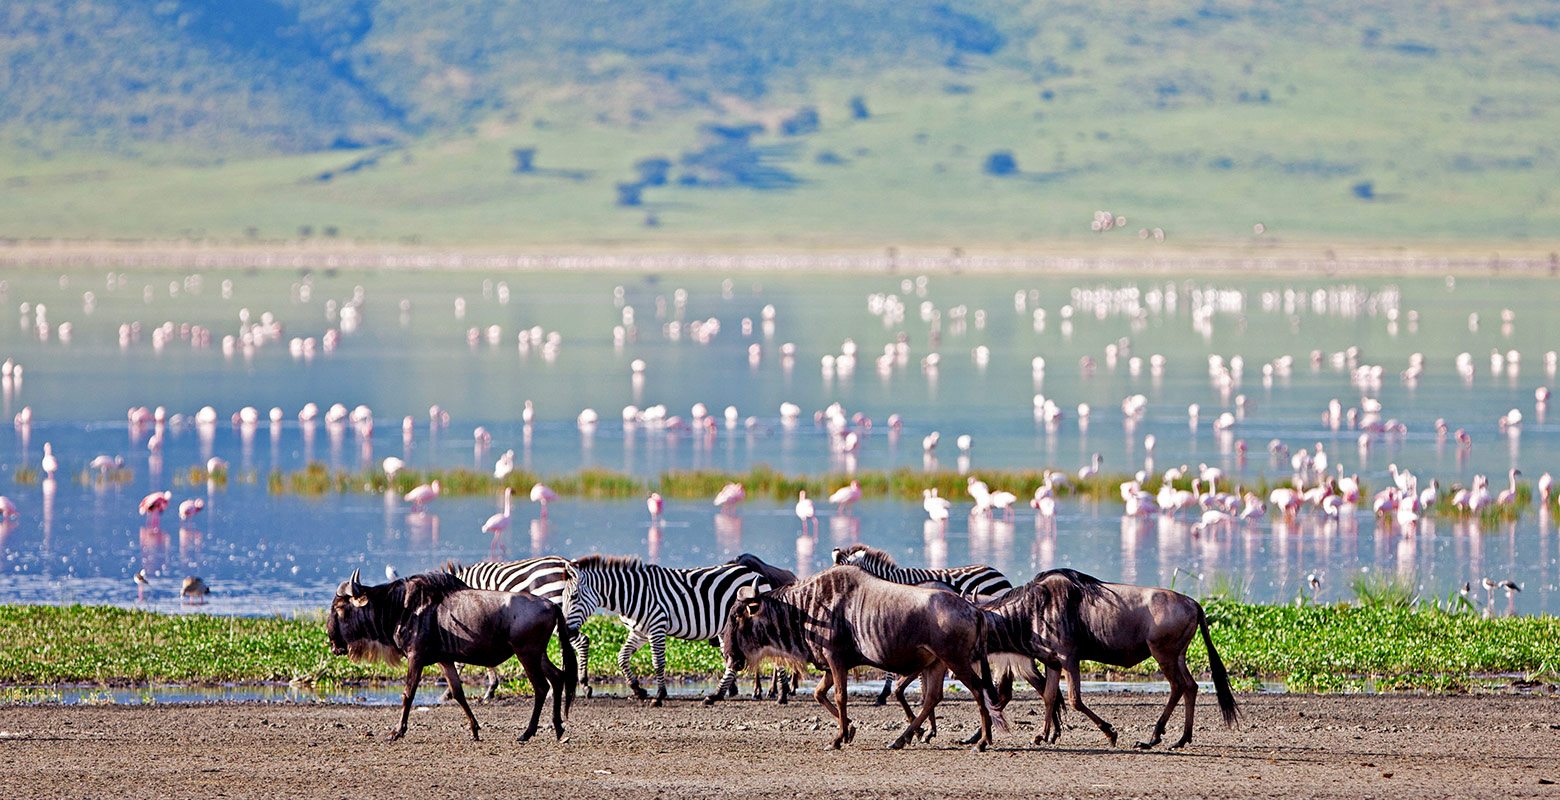 Why is Ngorongoro a Top Tourist Attraction?